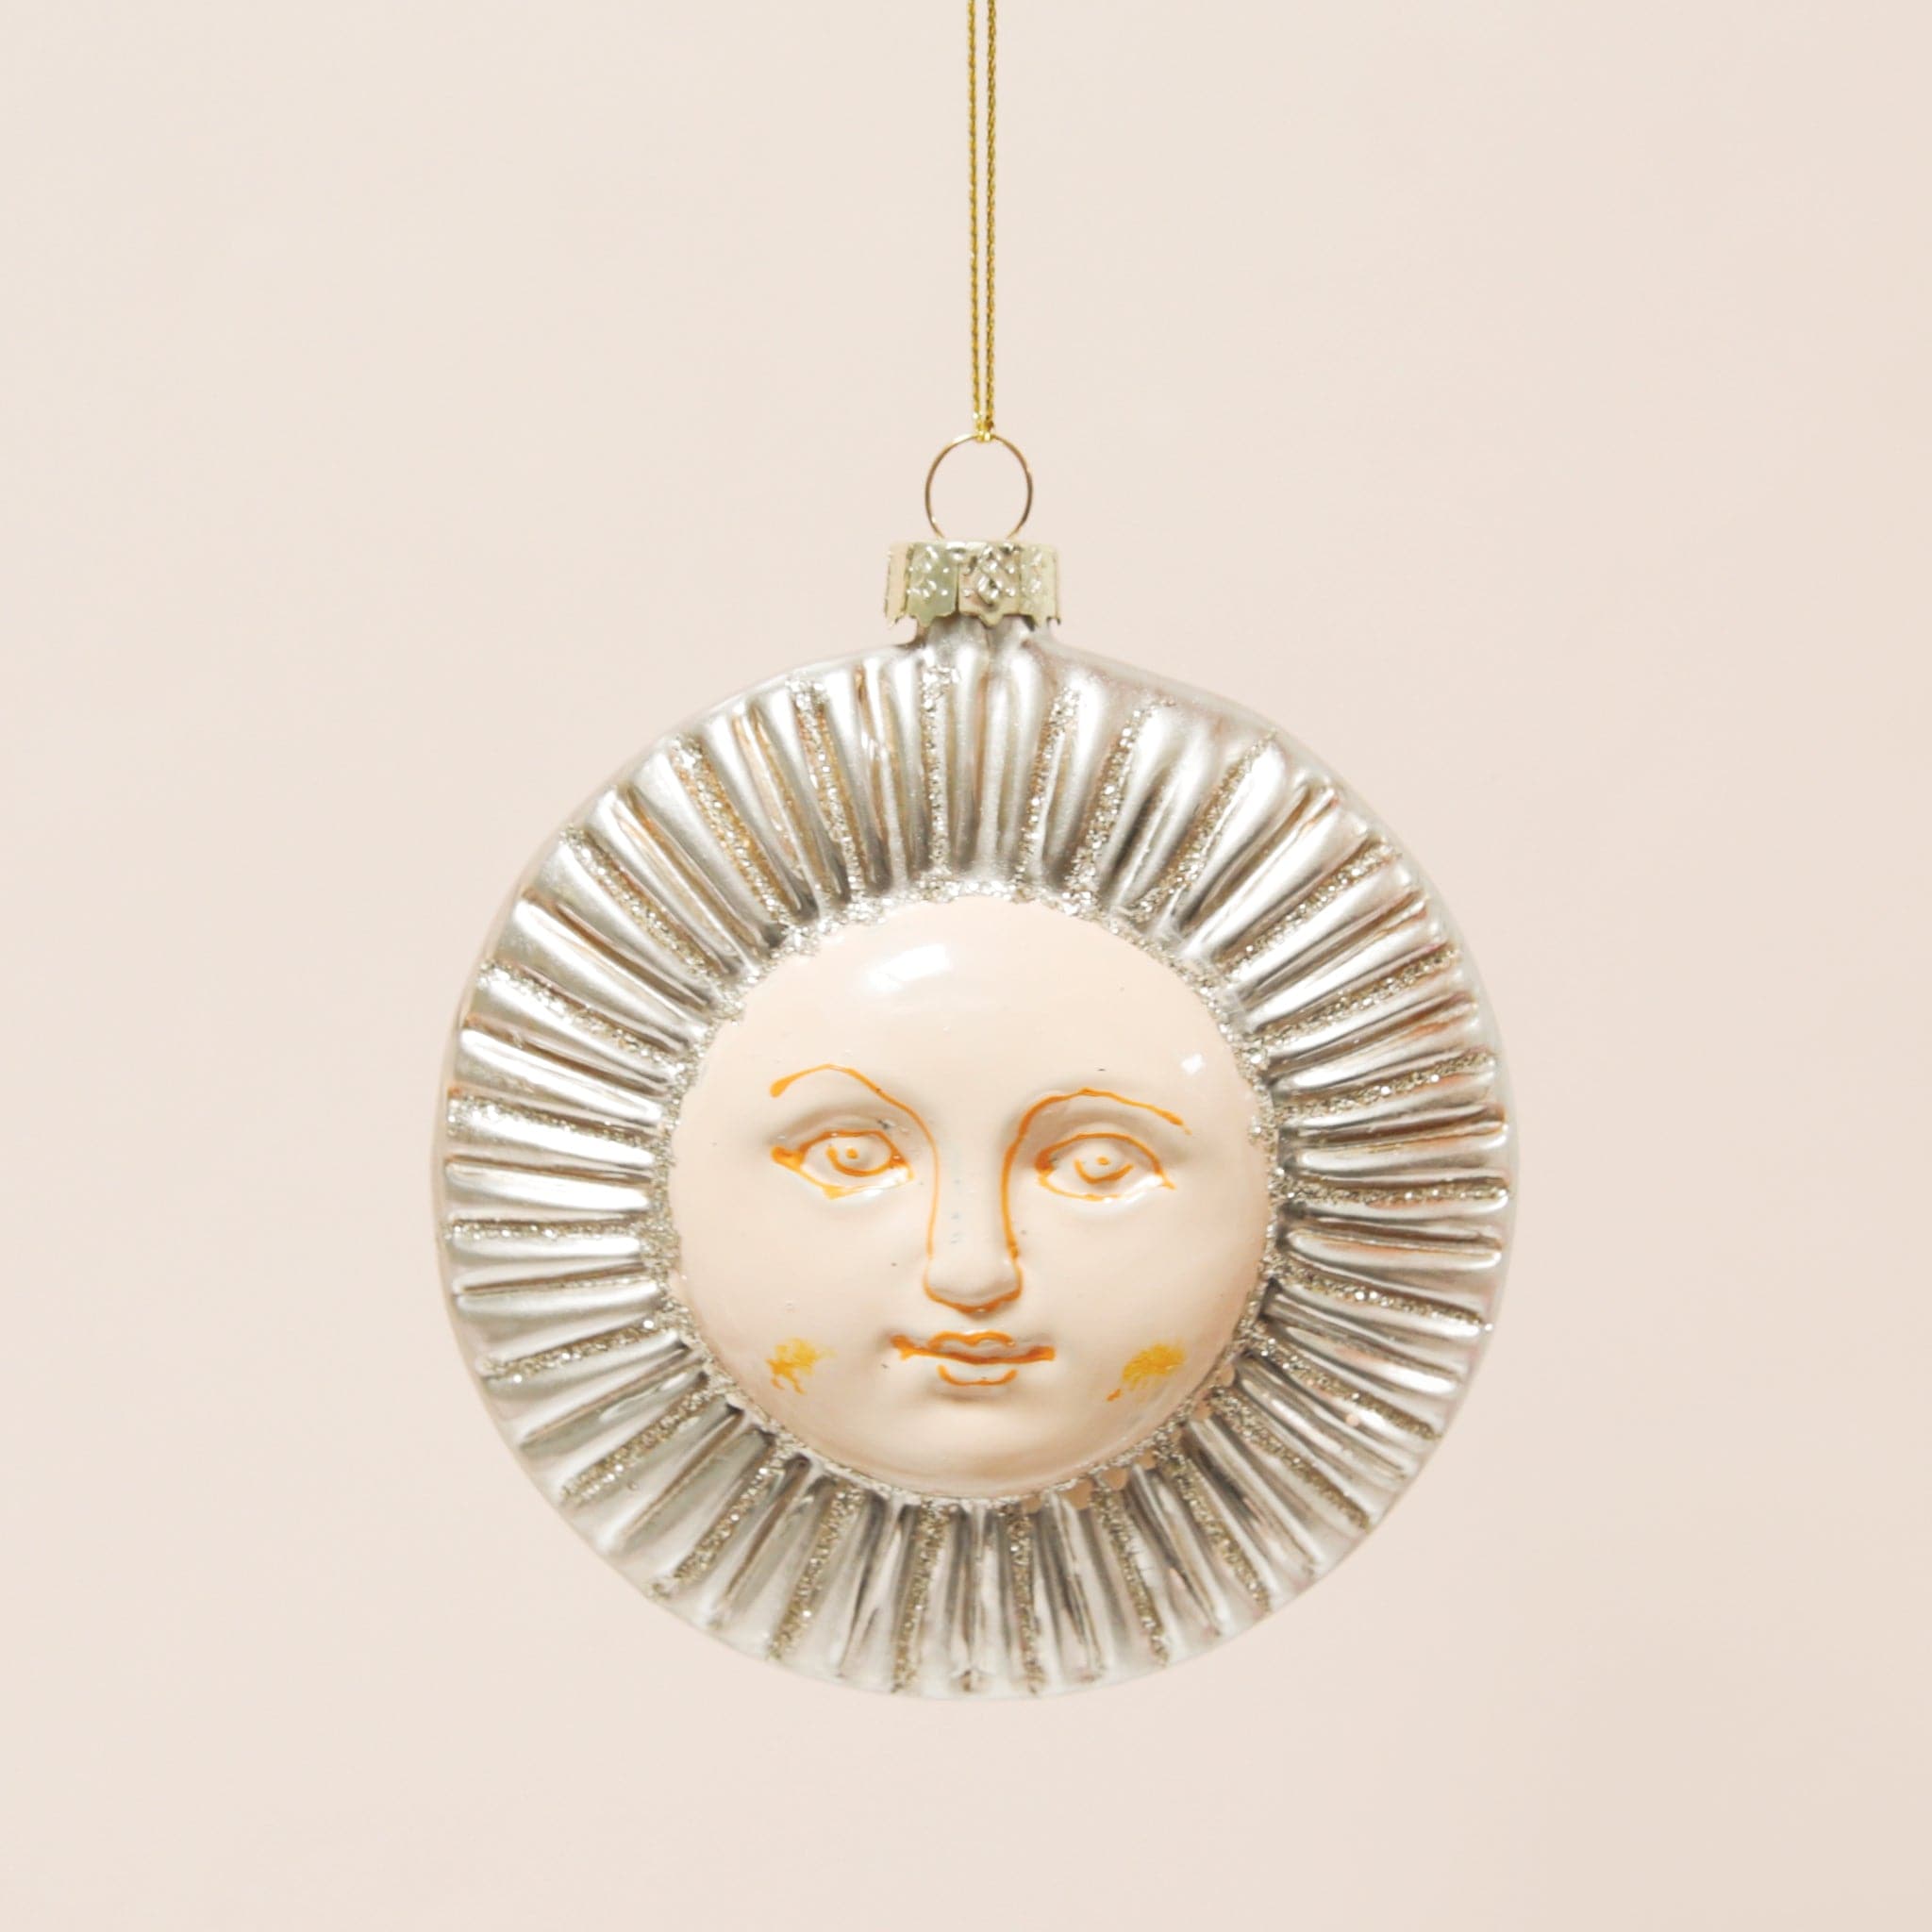 A round glass silver sun ornament with glitter detailing and a face in the center.